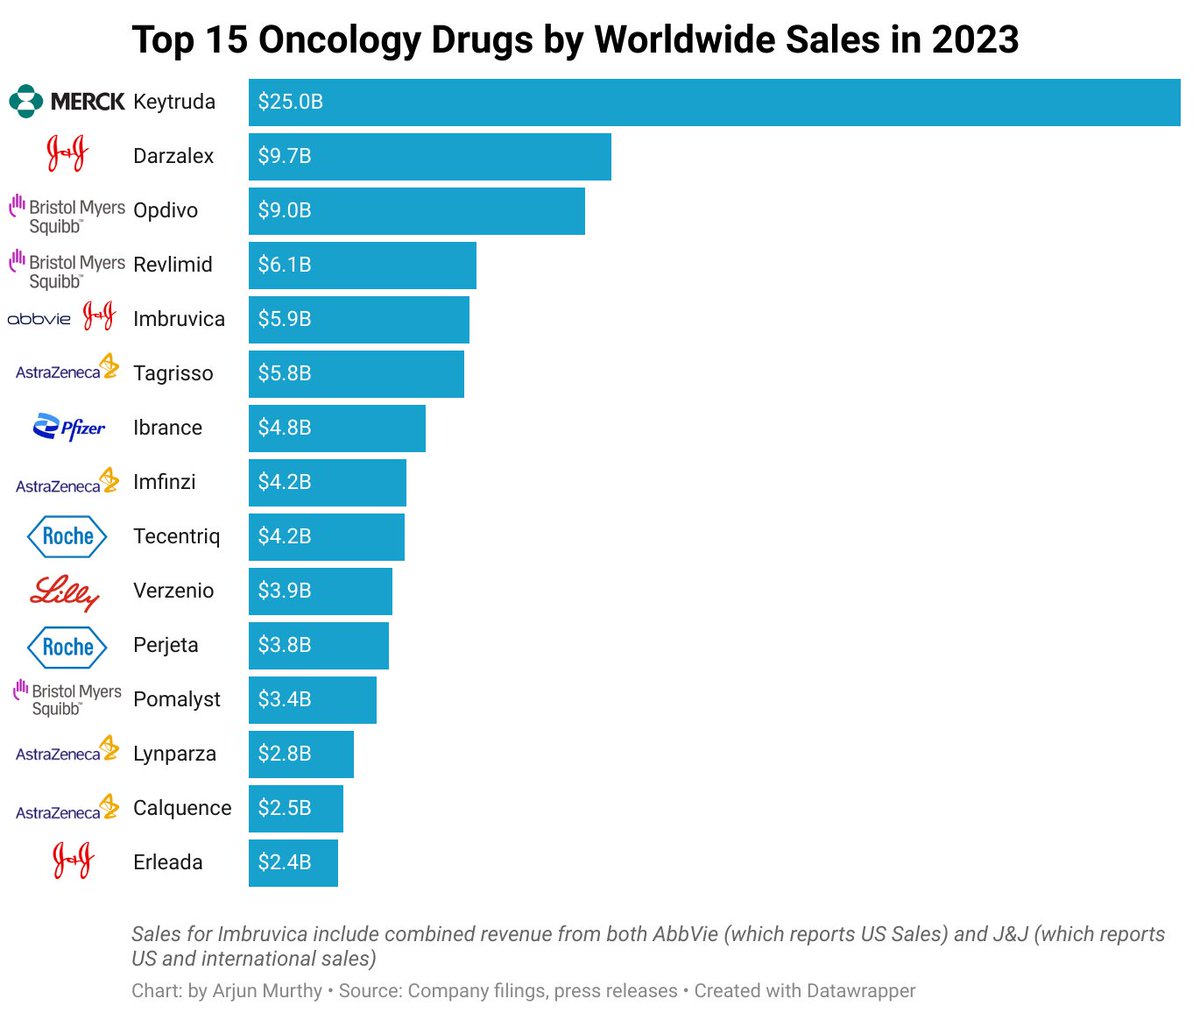 Oncology is the single largest pharma market - here's a look at the 15 biggest oncology drugs by sales in 2023.

Notable that several of the top sellers are facing LOEs soon - Keytruda and Opdivo both in '28